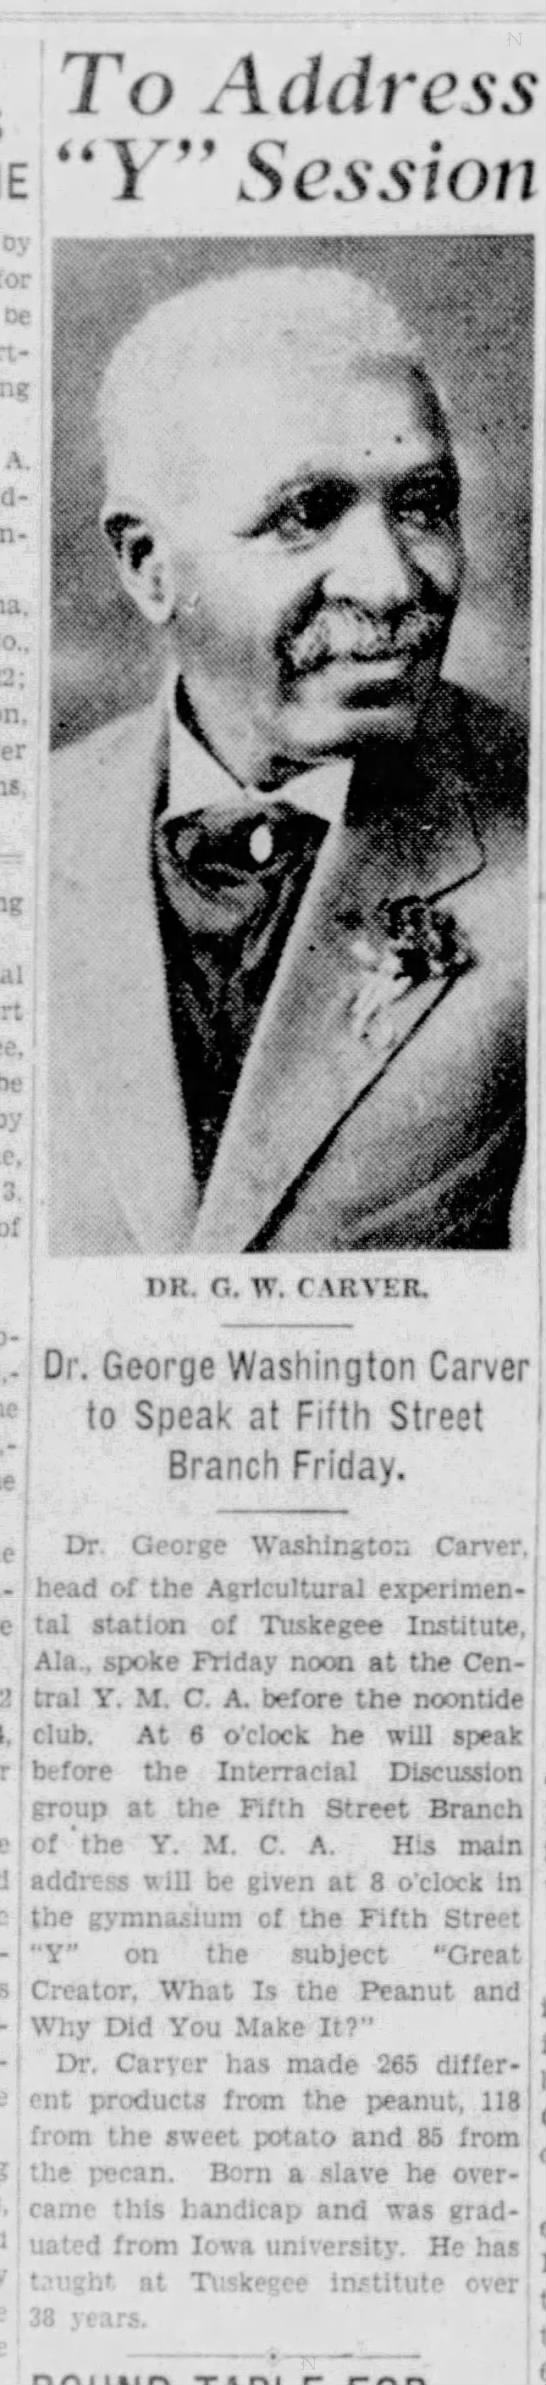 George Washington Carver to speak about peanuts at YMCA in 1932 - 